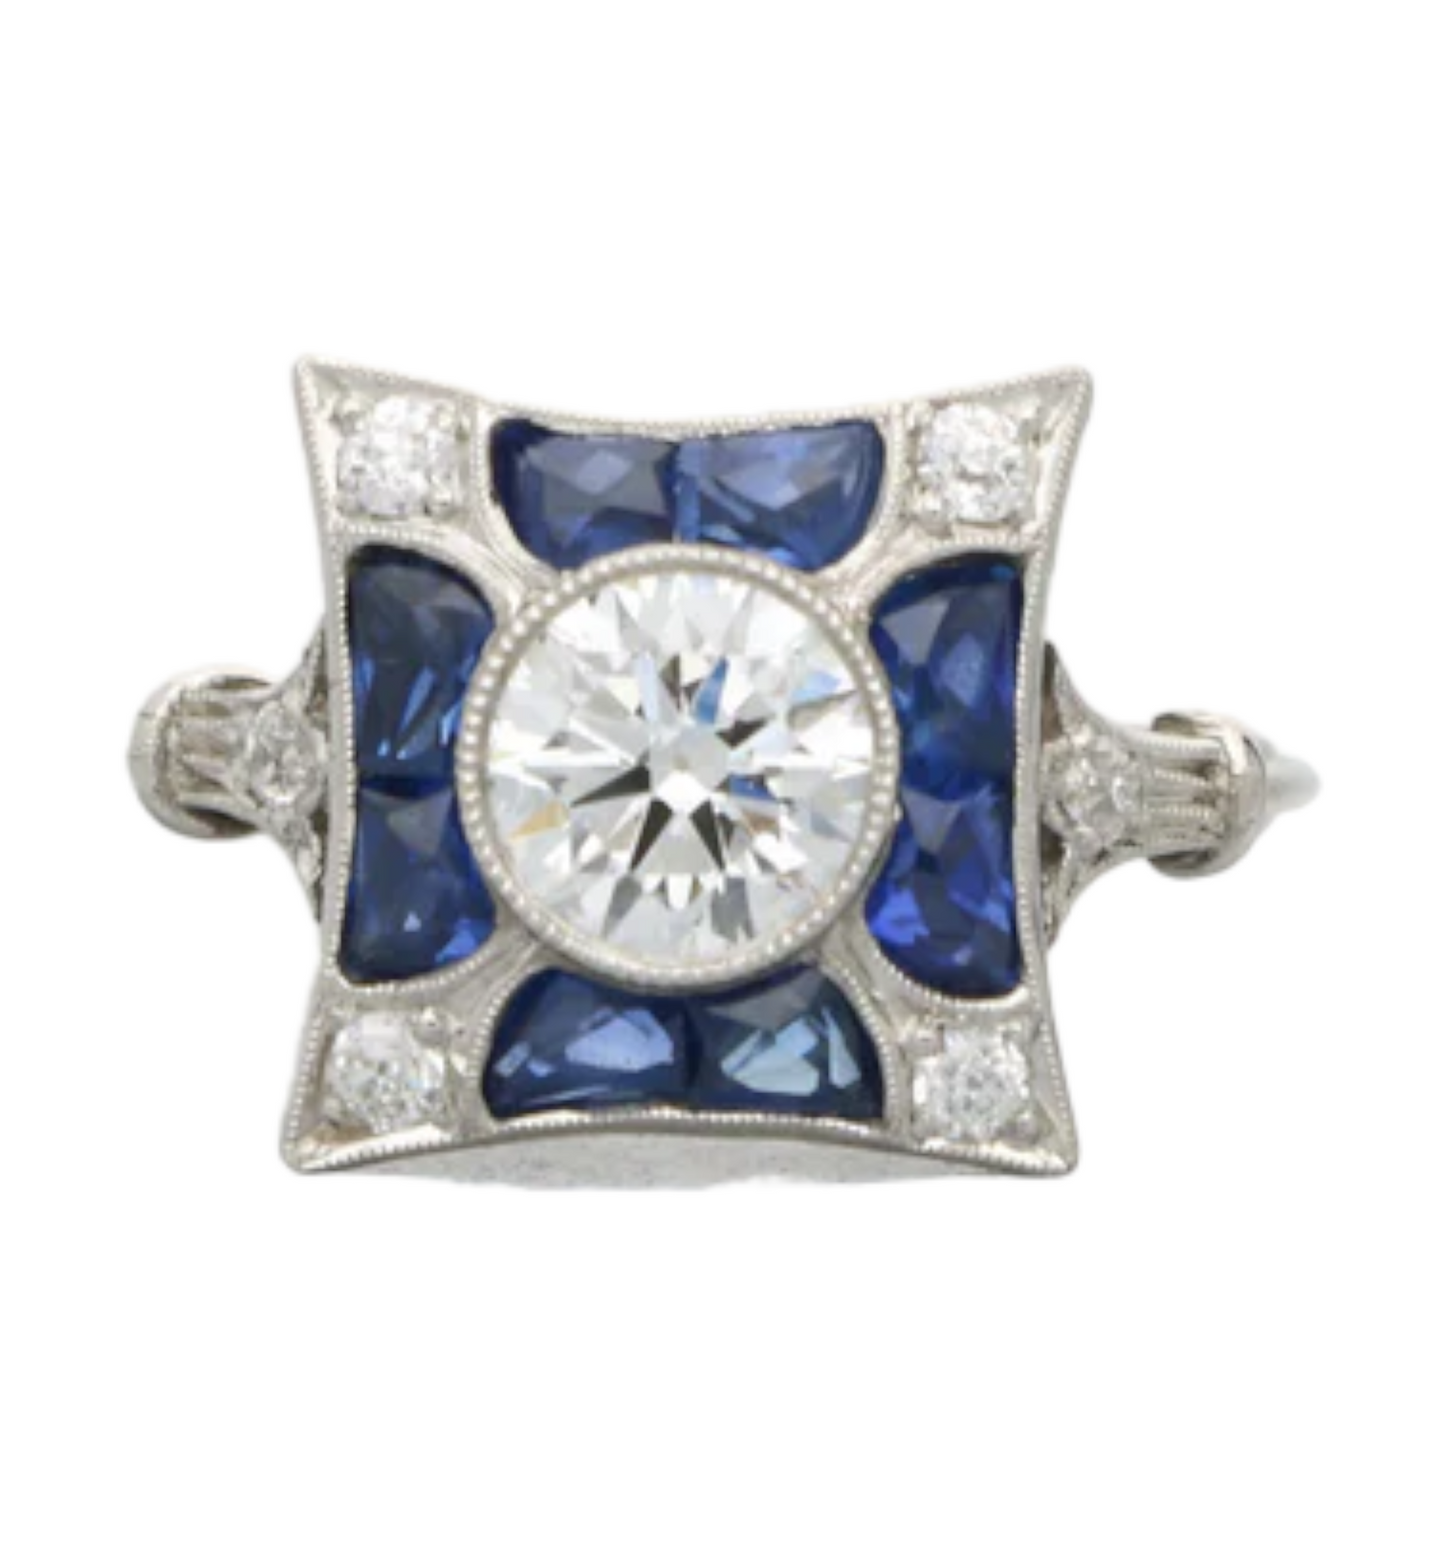 Art Deco style diamond and sapphire engagement ring